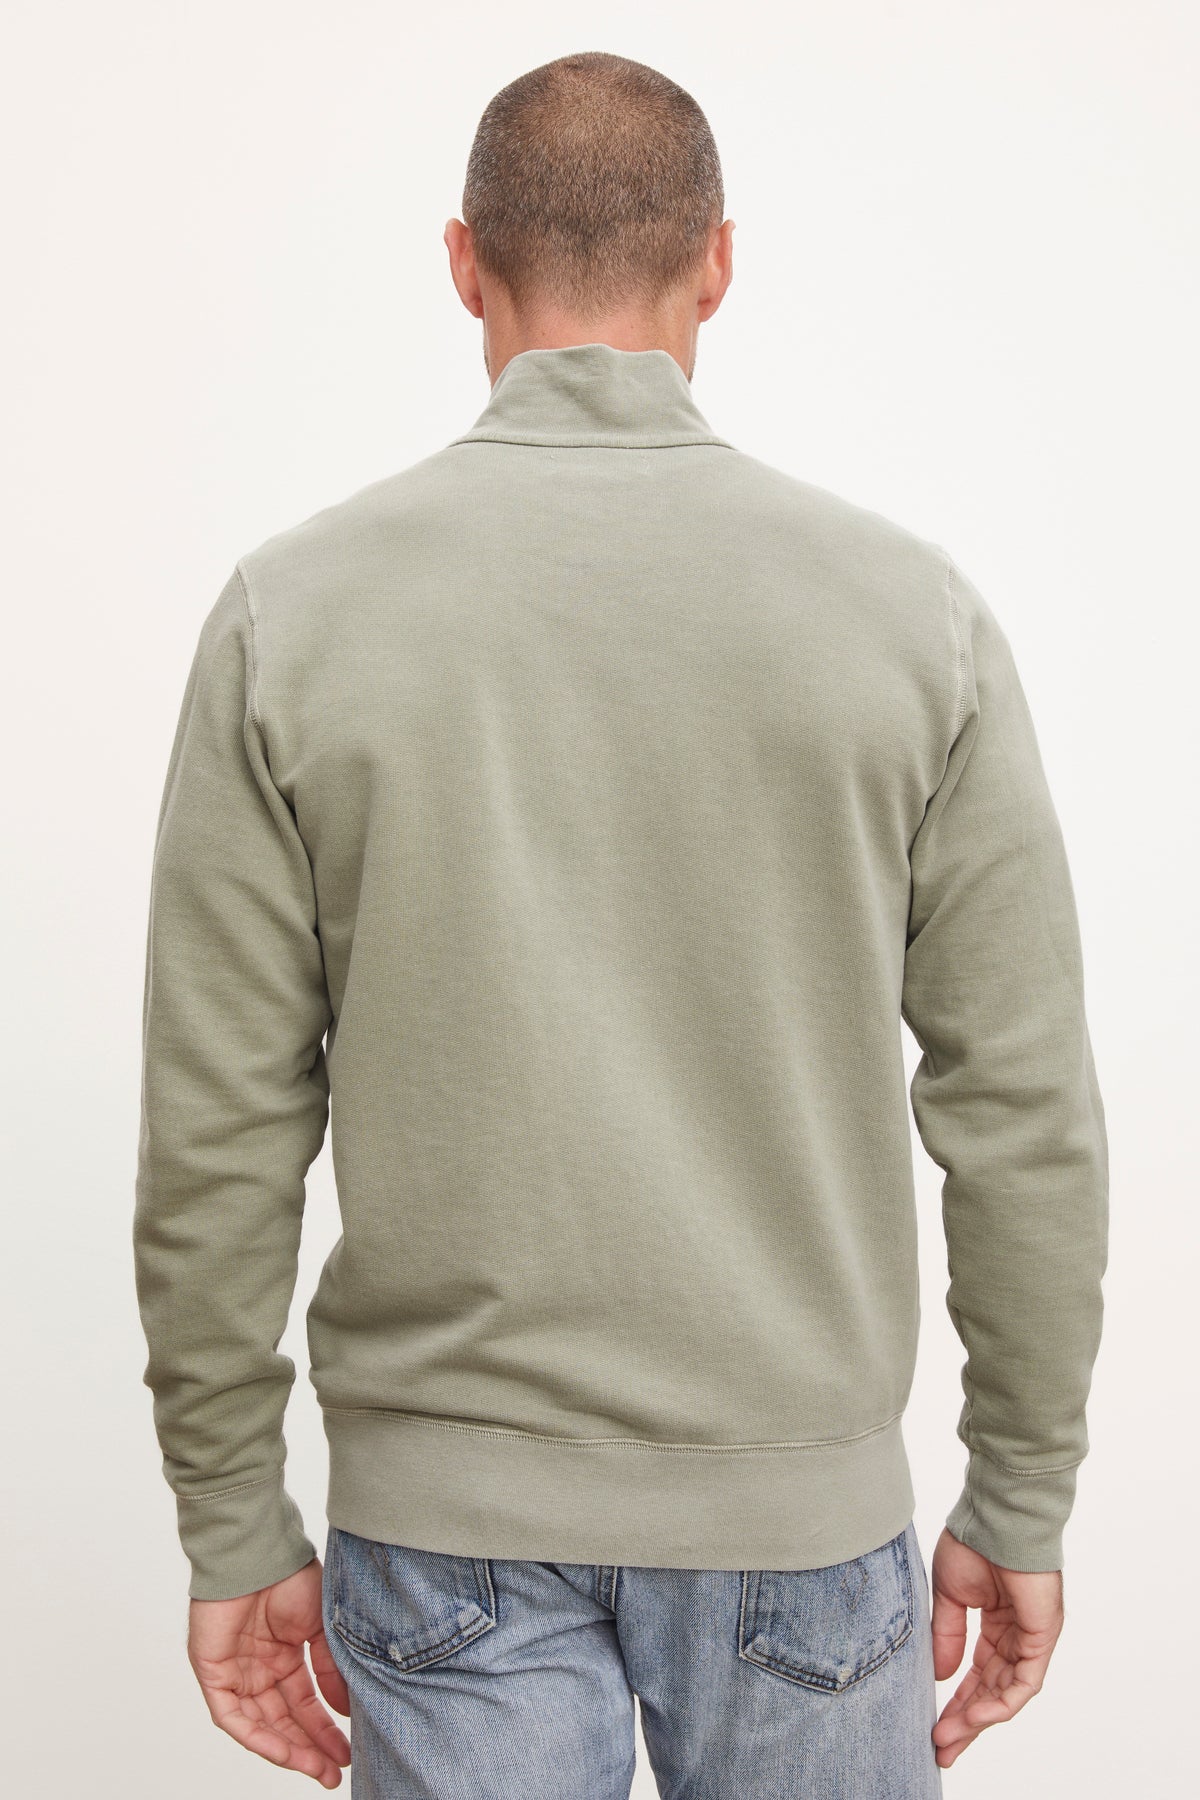   The back view of a man wearing a green Velvet by Graham & Spencer TERRY FRENCH TERRY FULL-ZIP sweatshirt. 